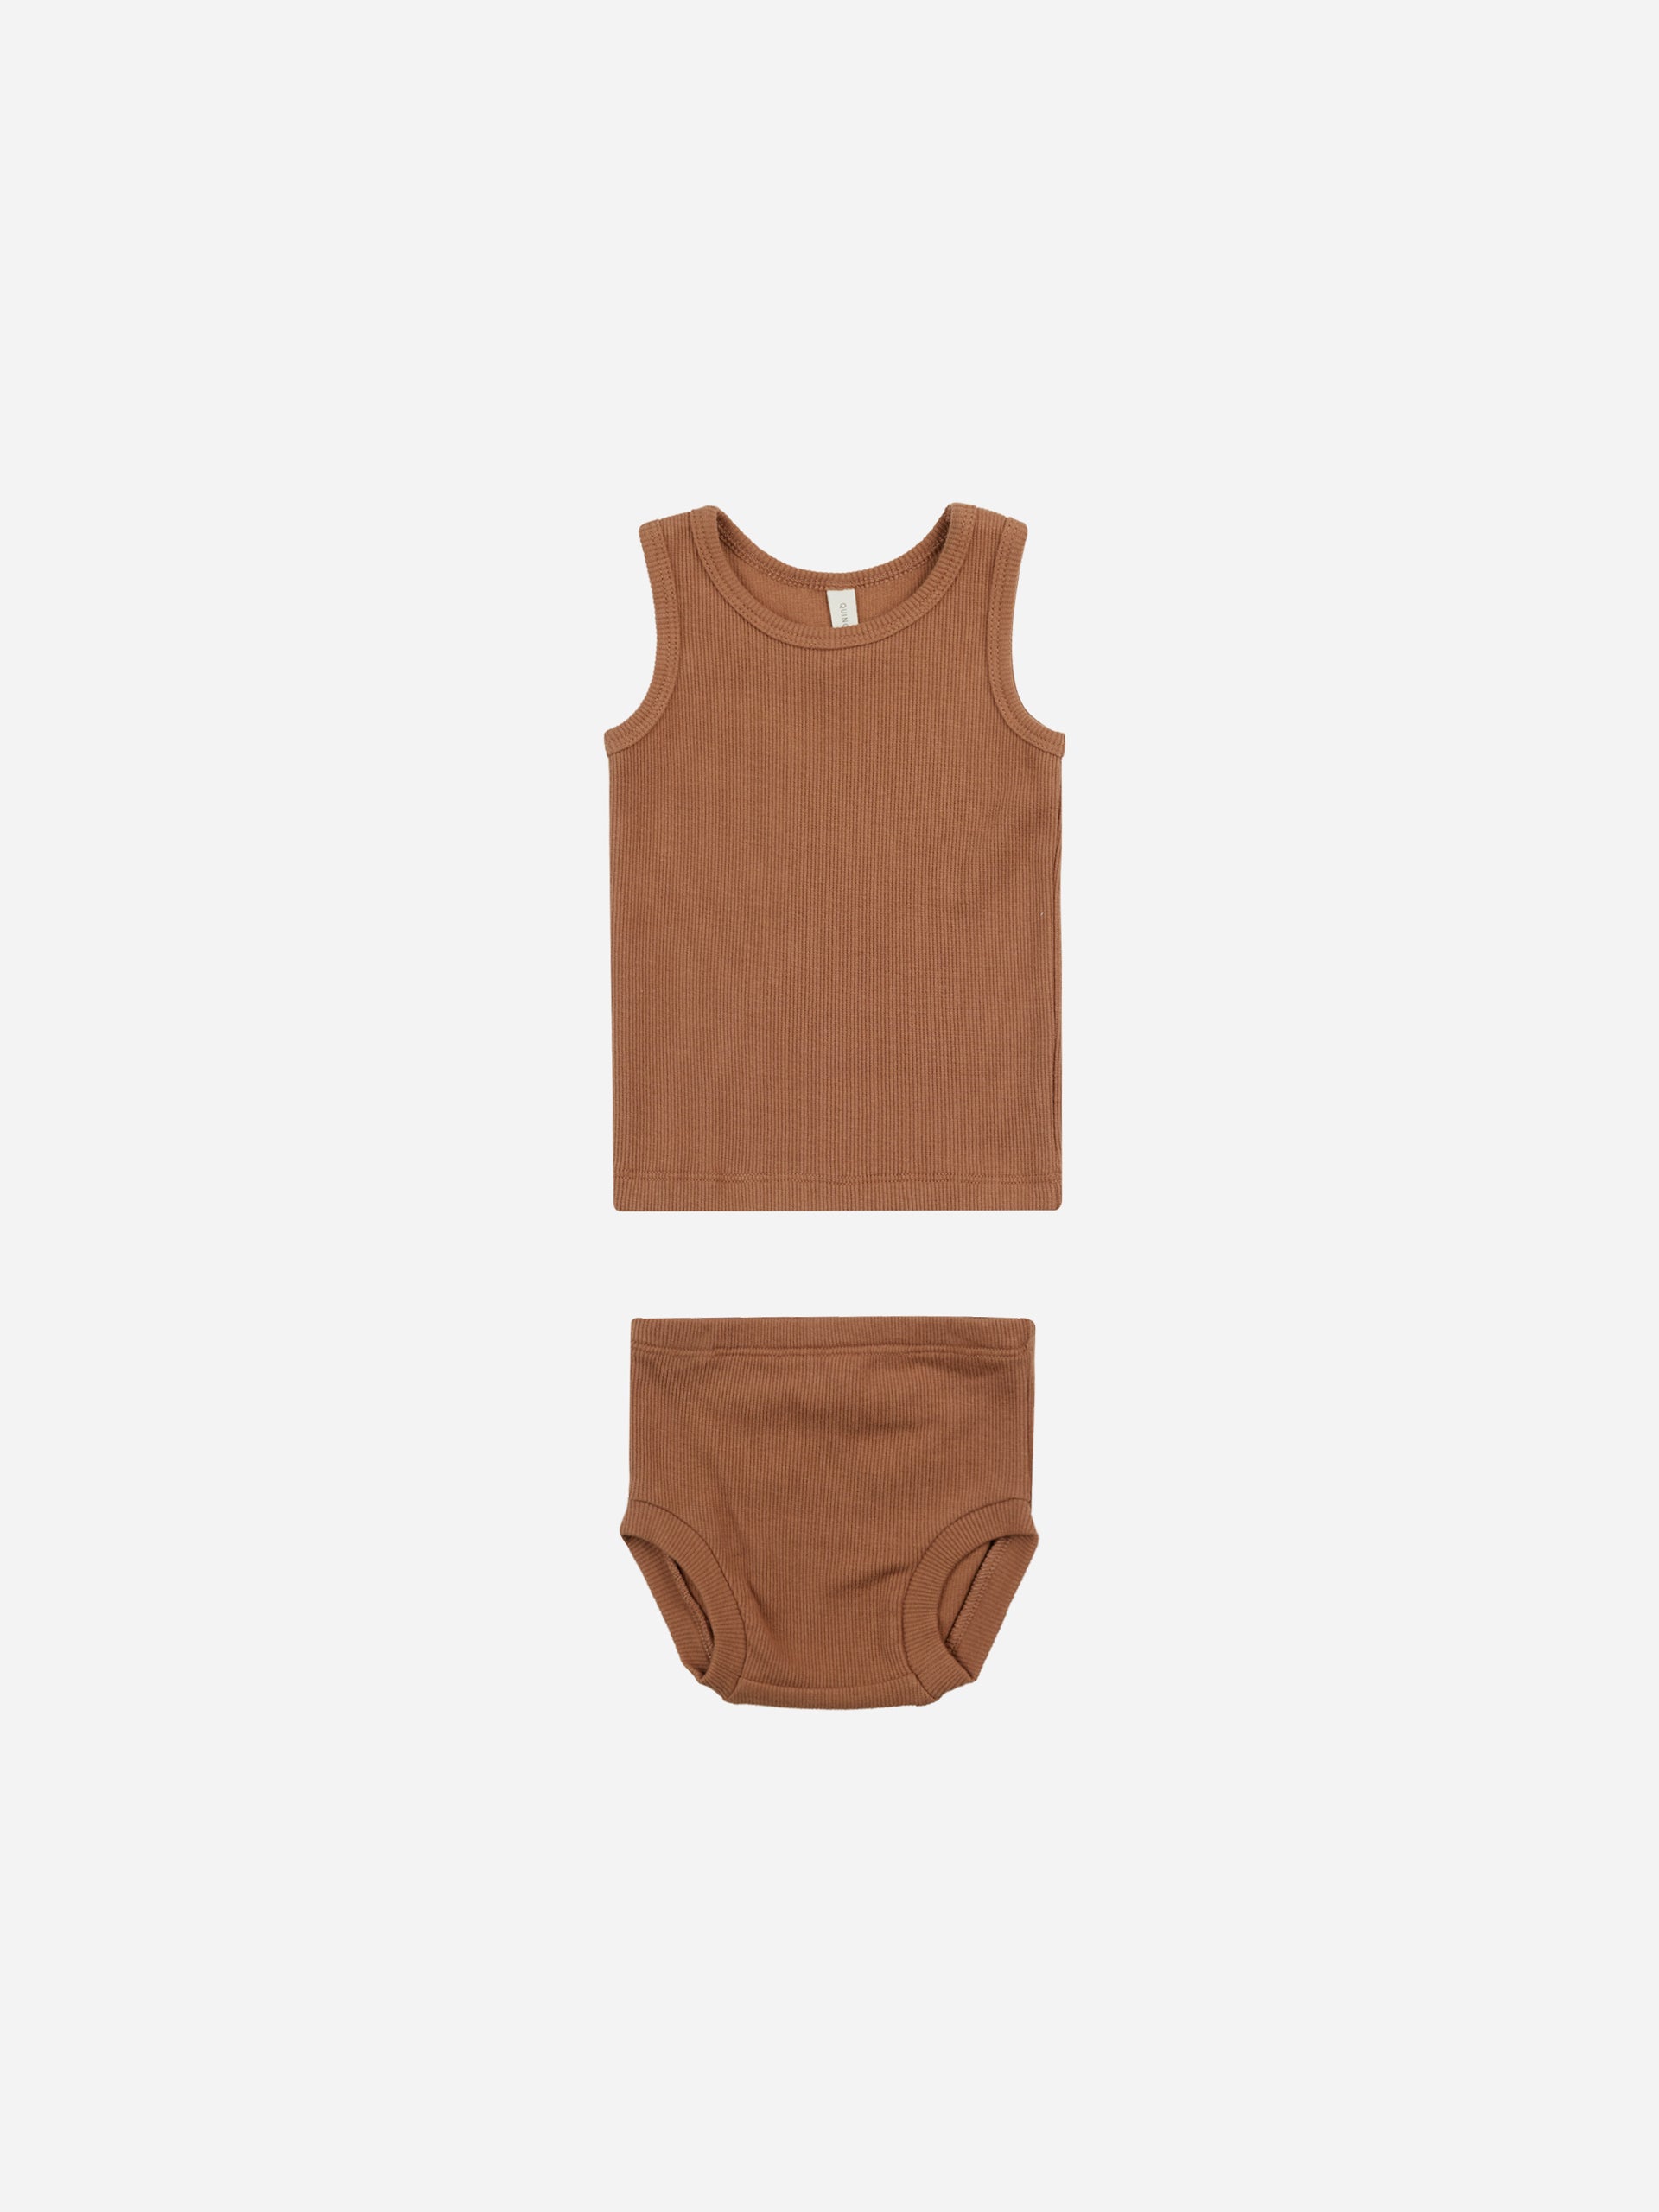 Ribbed Tank + Bloomer Set || Clay - Rylee + Cru | Kids Clothes | Trendy Baby Clothes | Modern Infant Outfits |